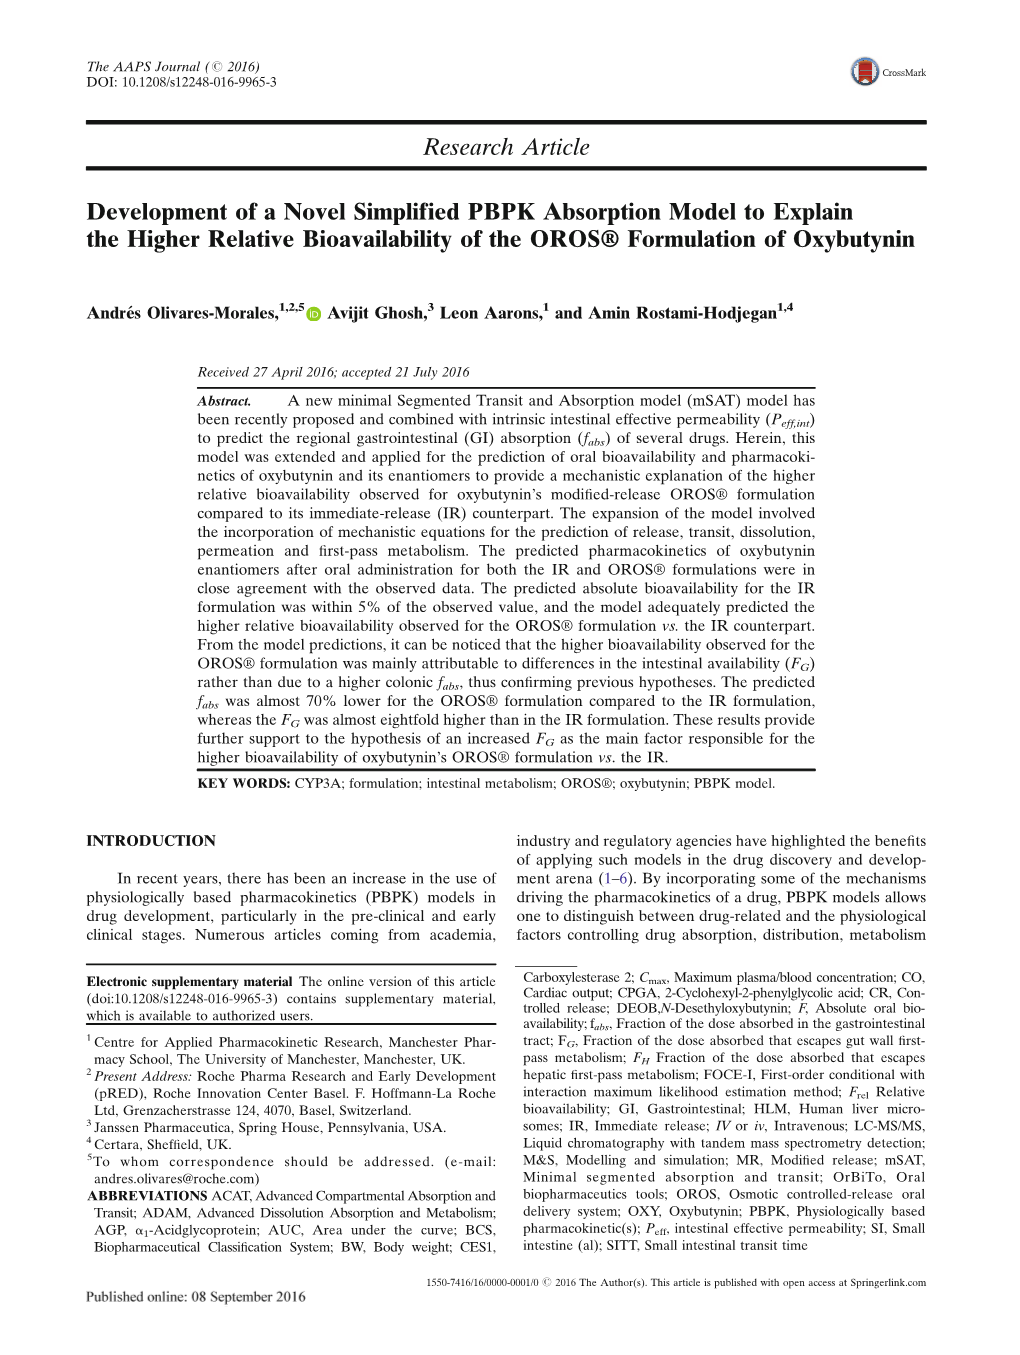 Development of a Novel Simplified PBPK Absorption Model to Explain the Higher Relative Bioavailability of the OROS® Formulation of Oxybutynin